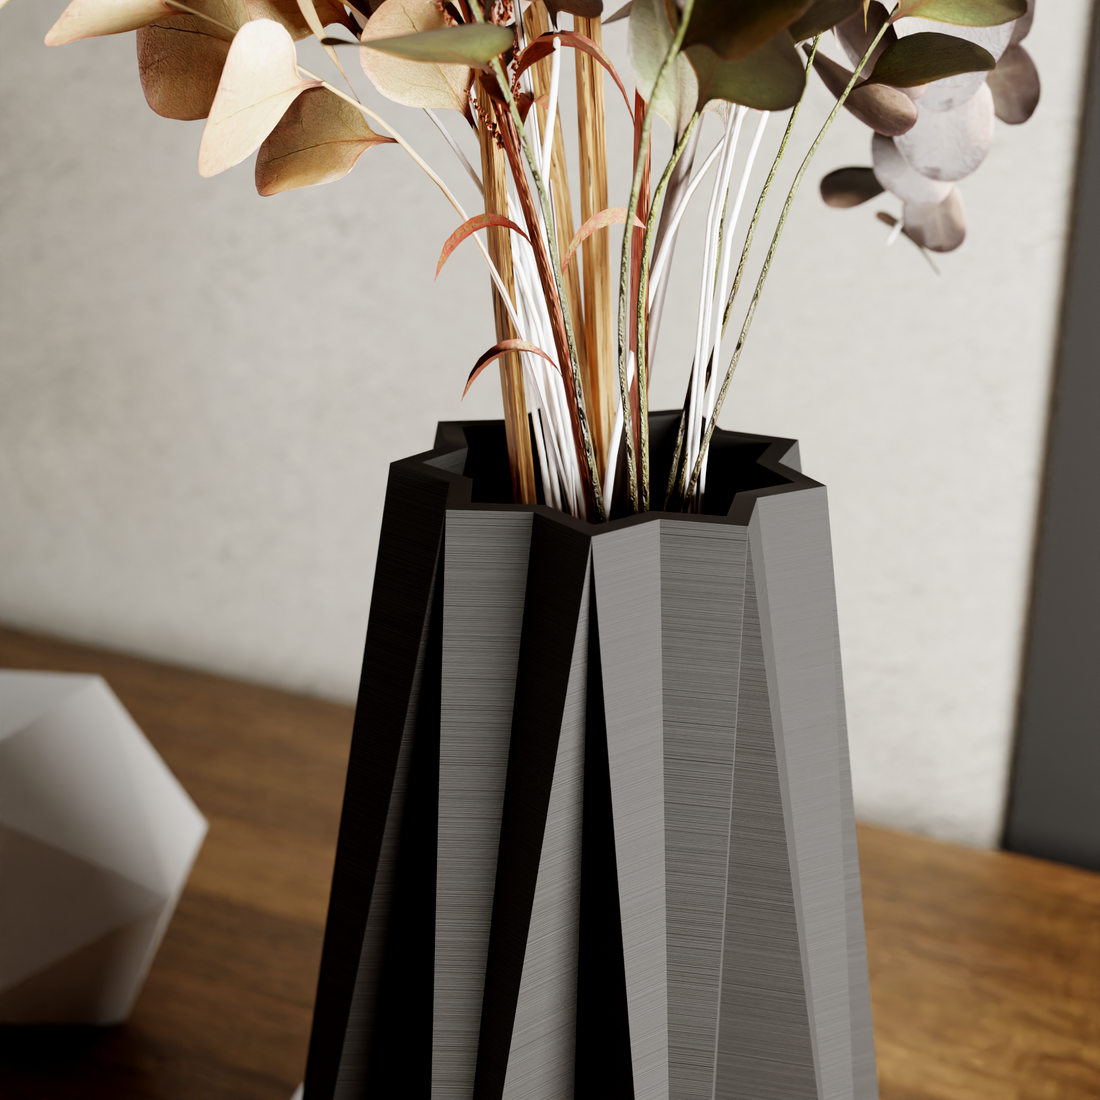 3D Printed Vase Midnight Black Large 'TIMBER' Vase for Dried Flowers